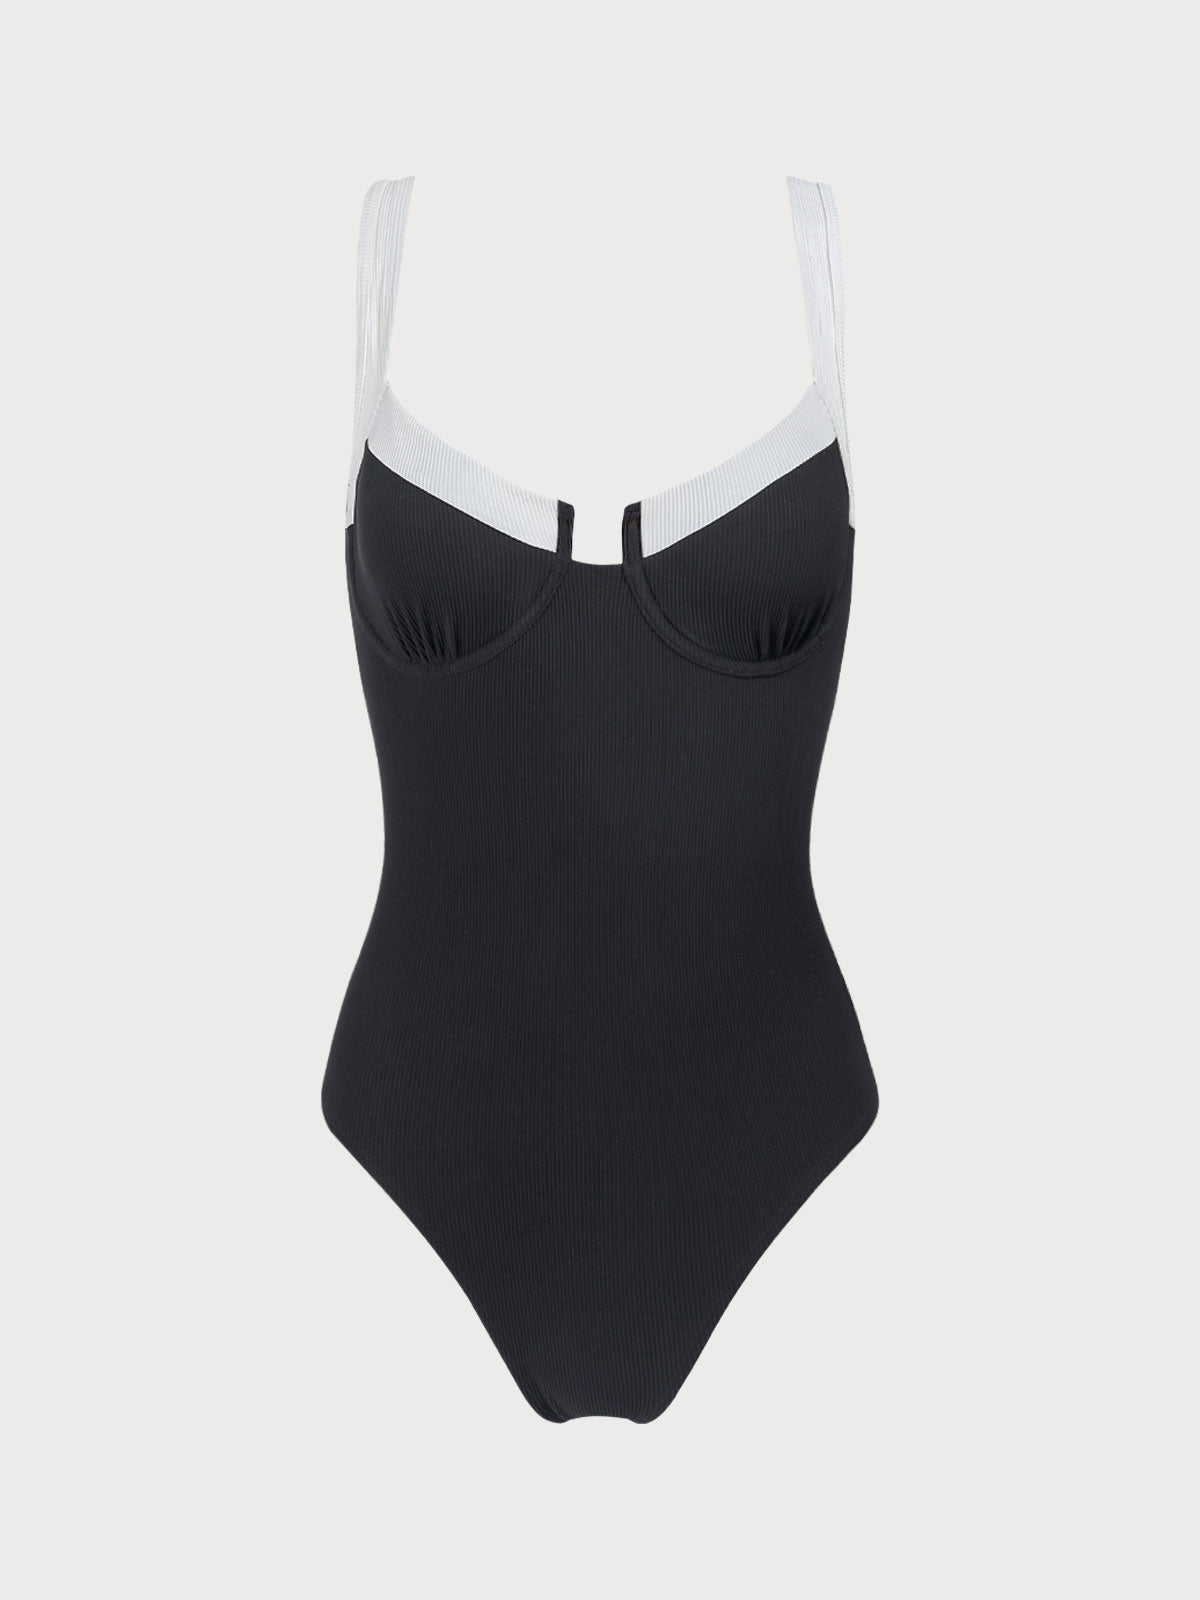 Contrast one piece swimsuit – Handmade by Lucy Bea